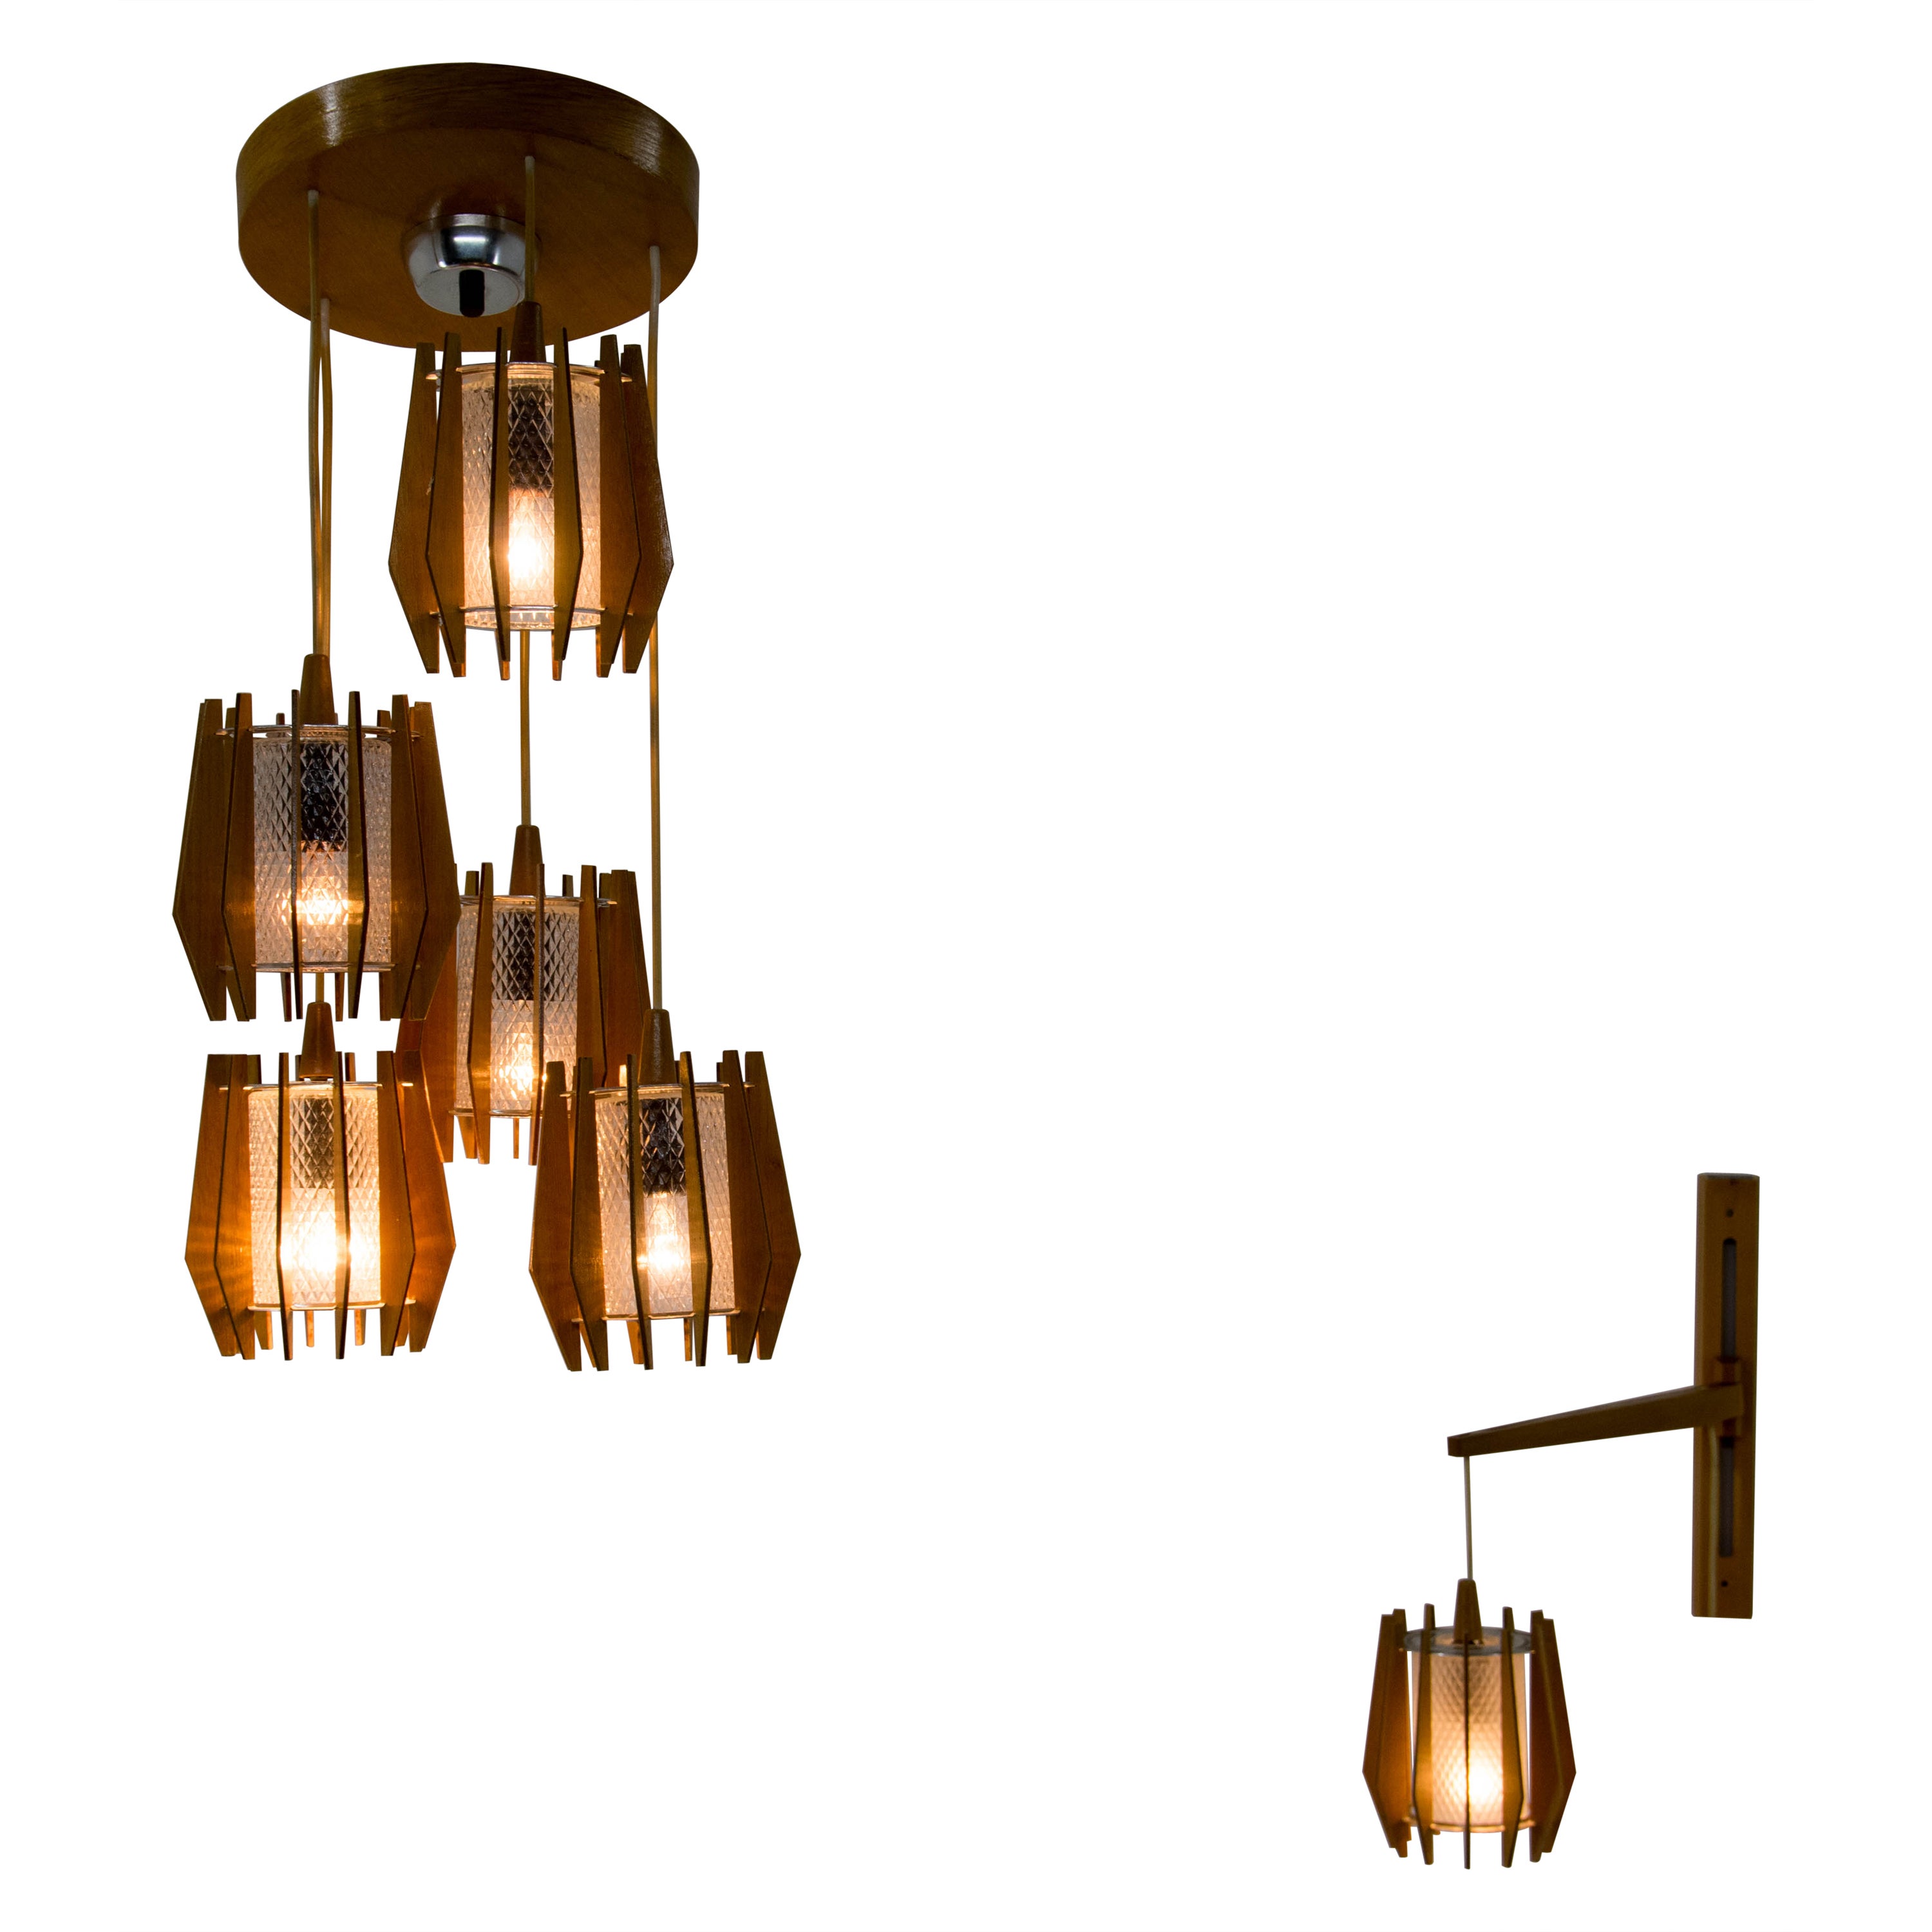 Set of Chandelier and Wall Lamp by Drevo Humpolec, 1970 For Sale